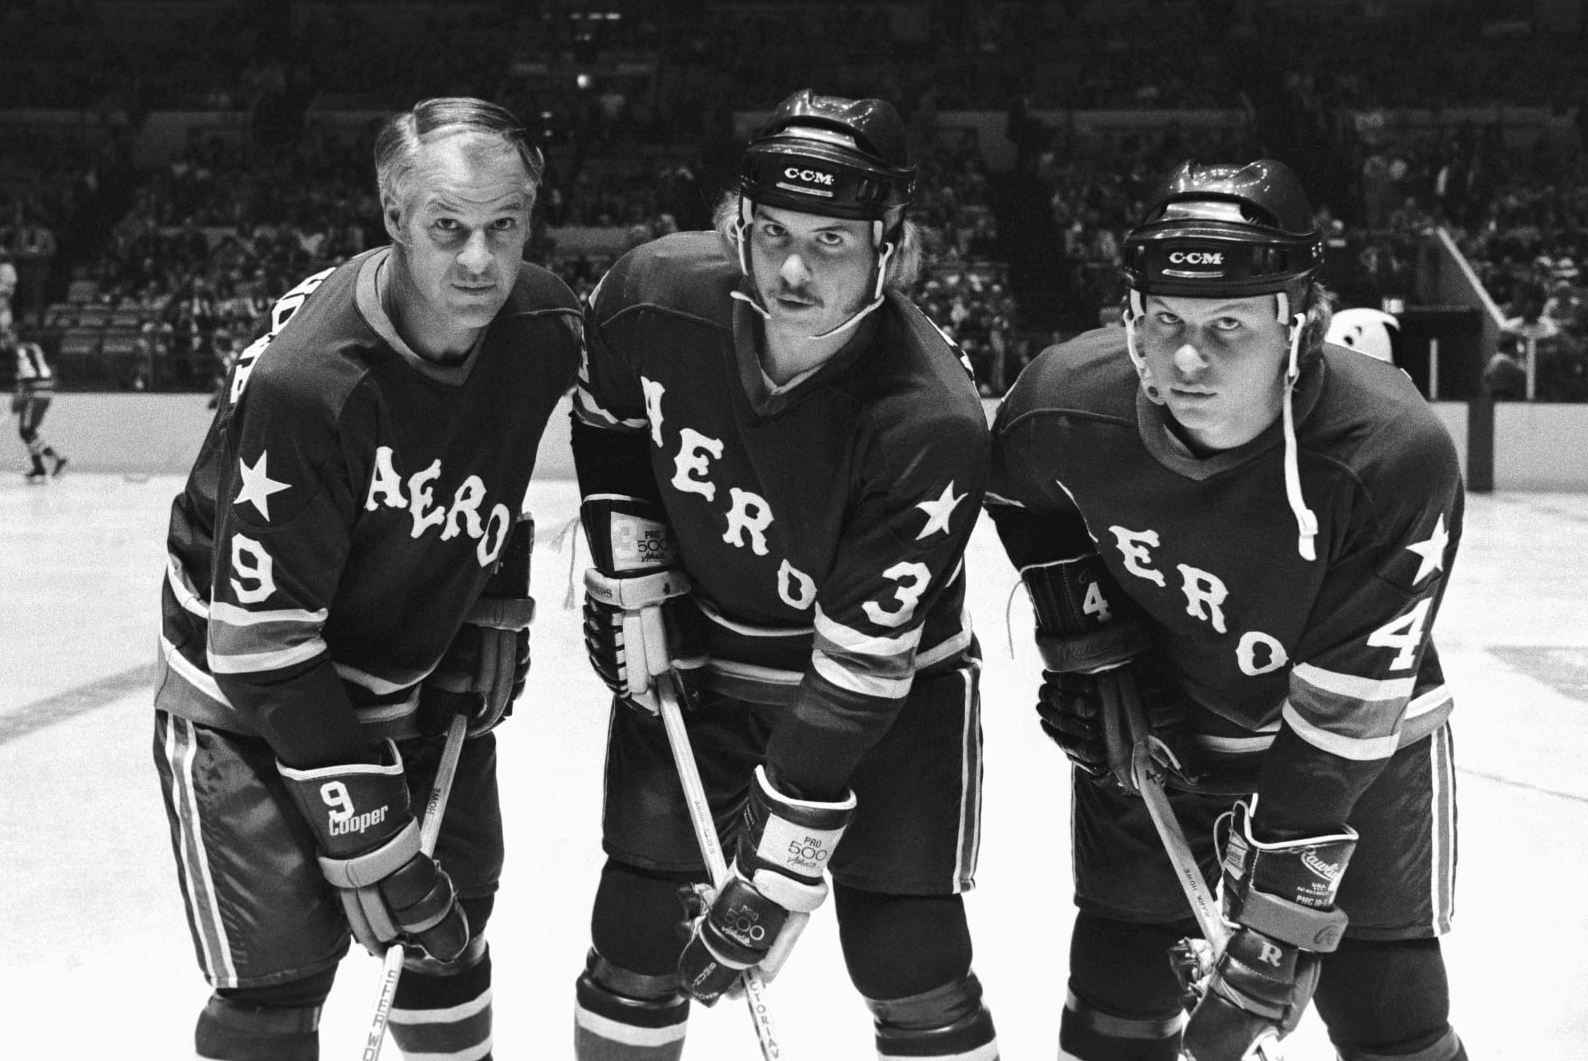 For 2 Years in the 1970s, Cleveland Had an NHL Team